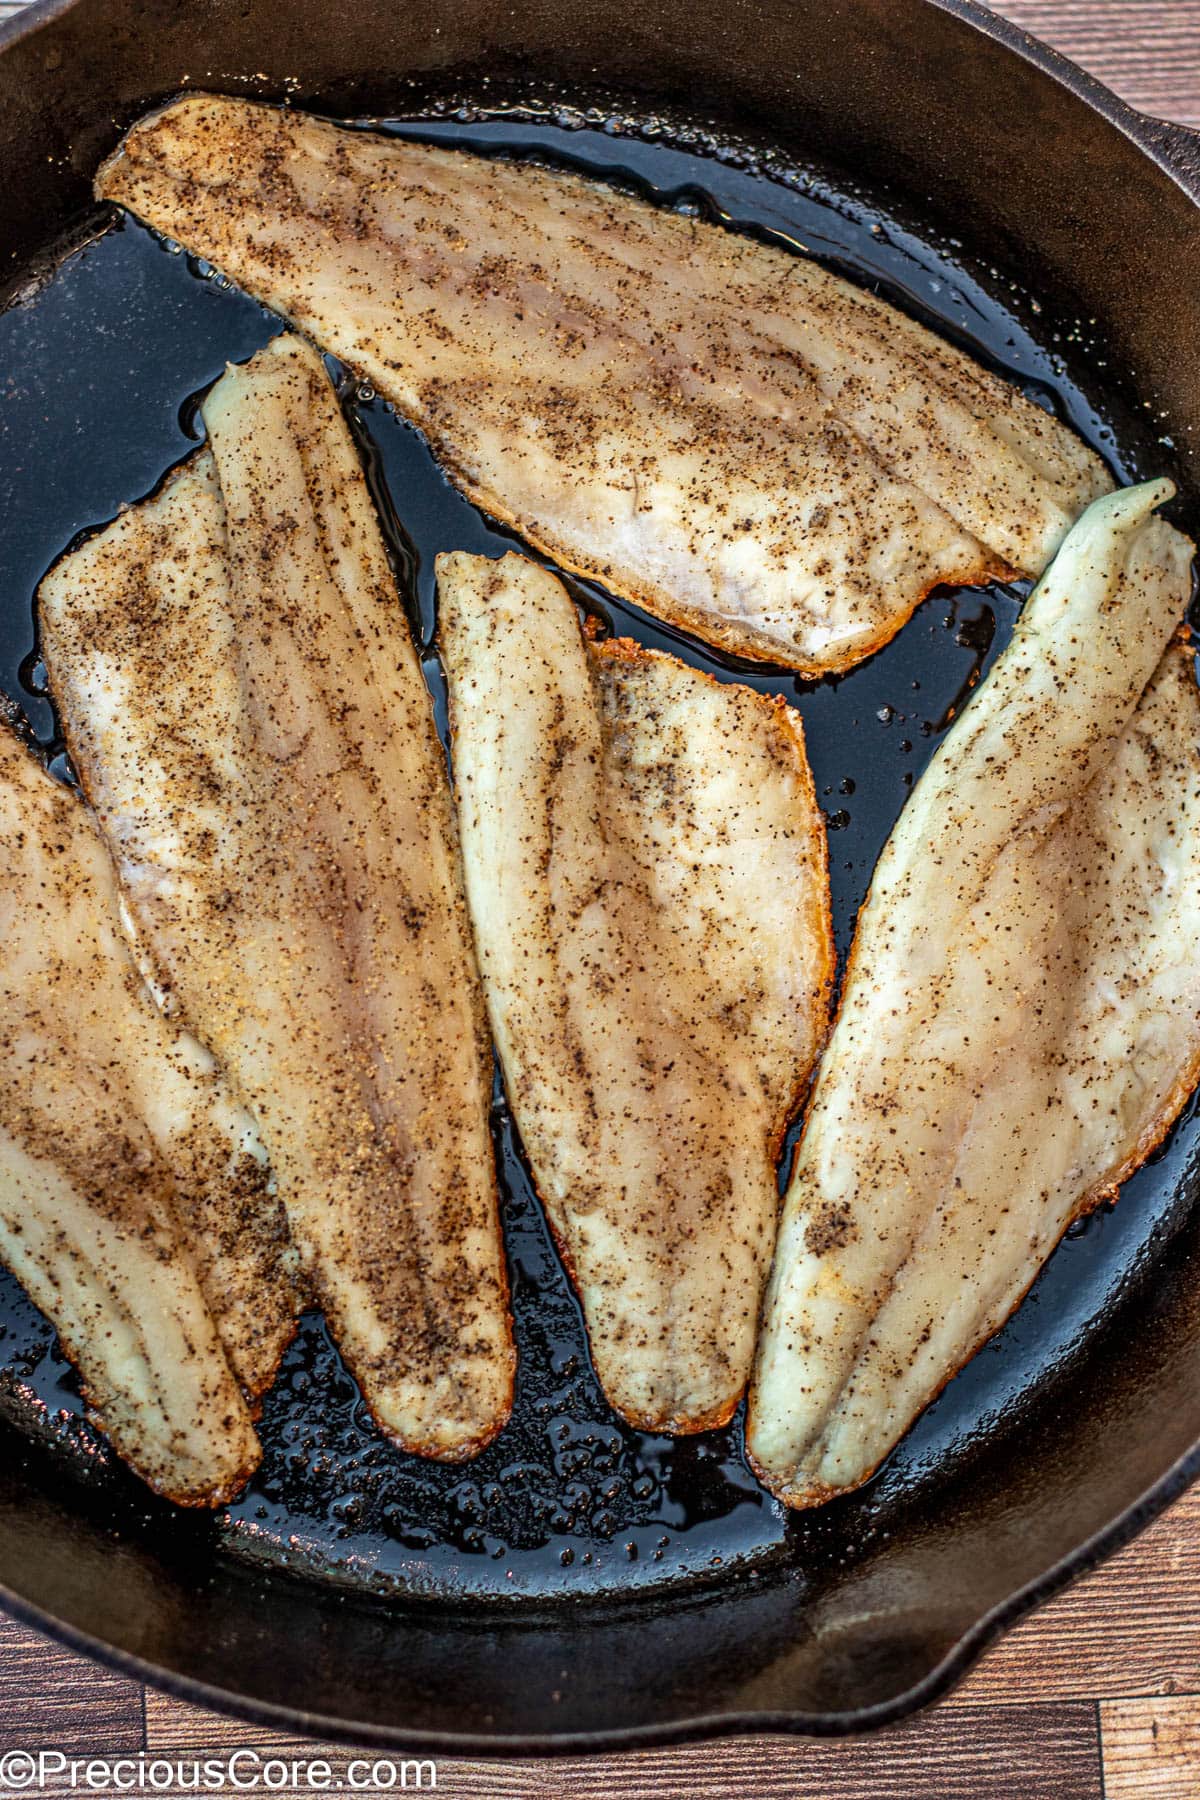 Fish filets in 12 inch cast iron skillet.